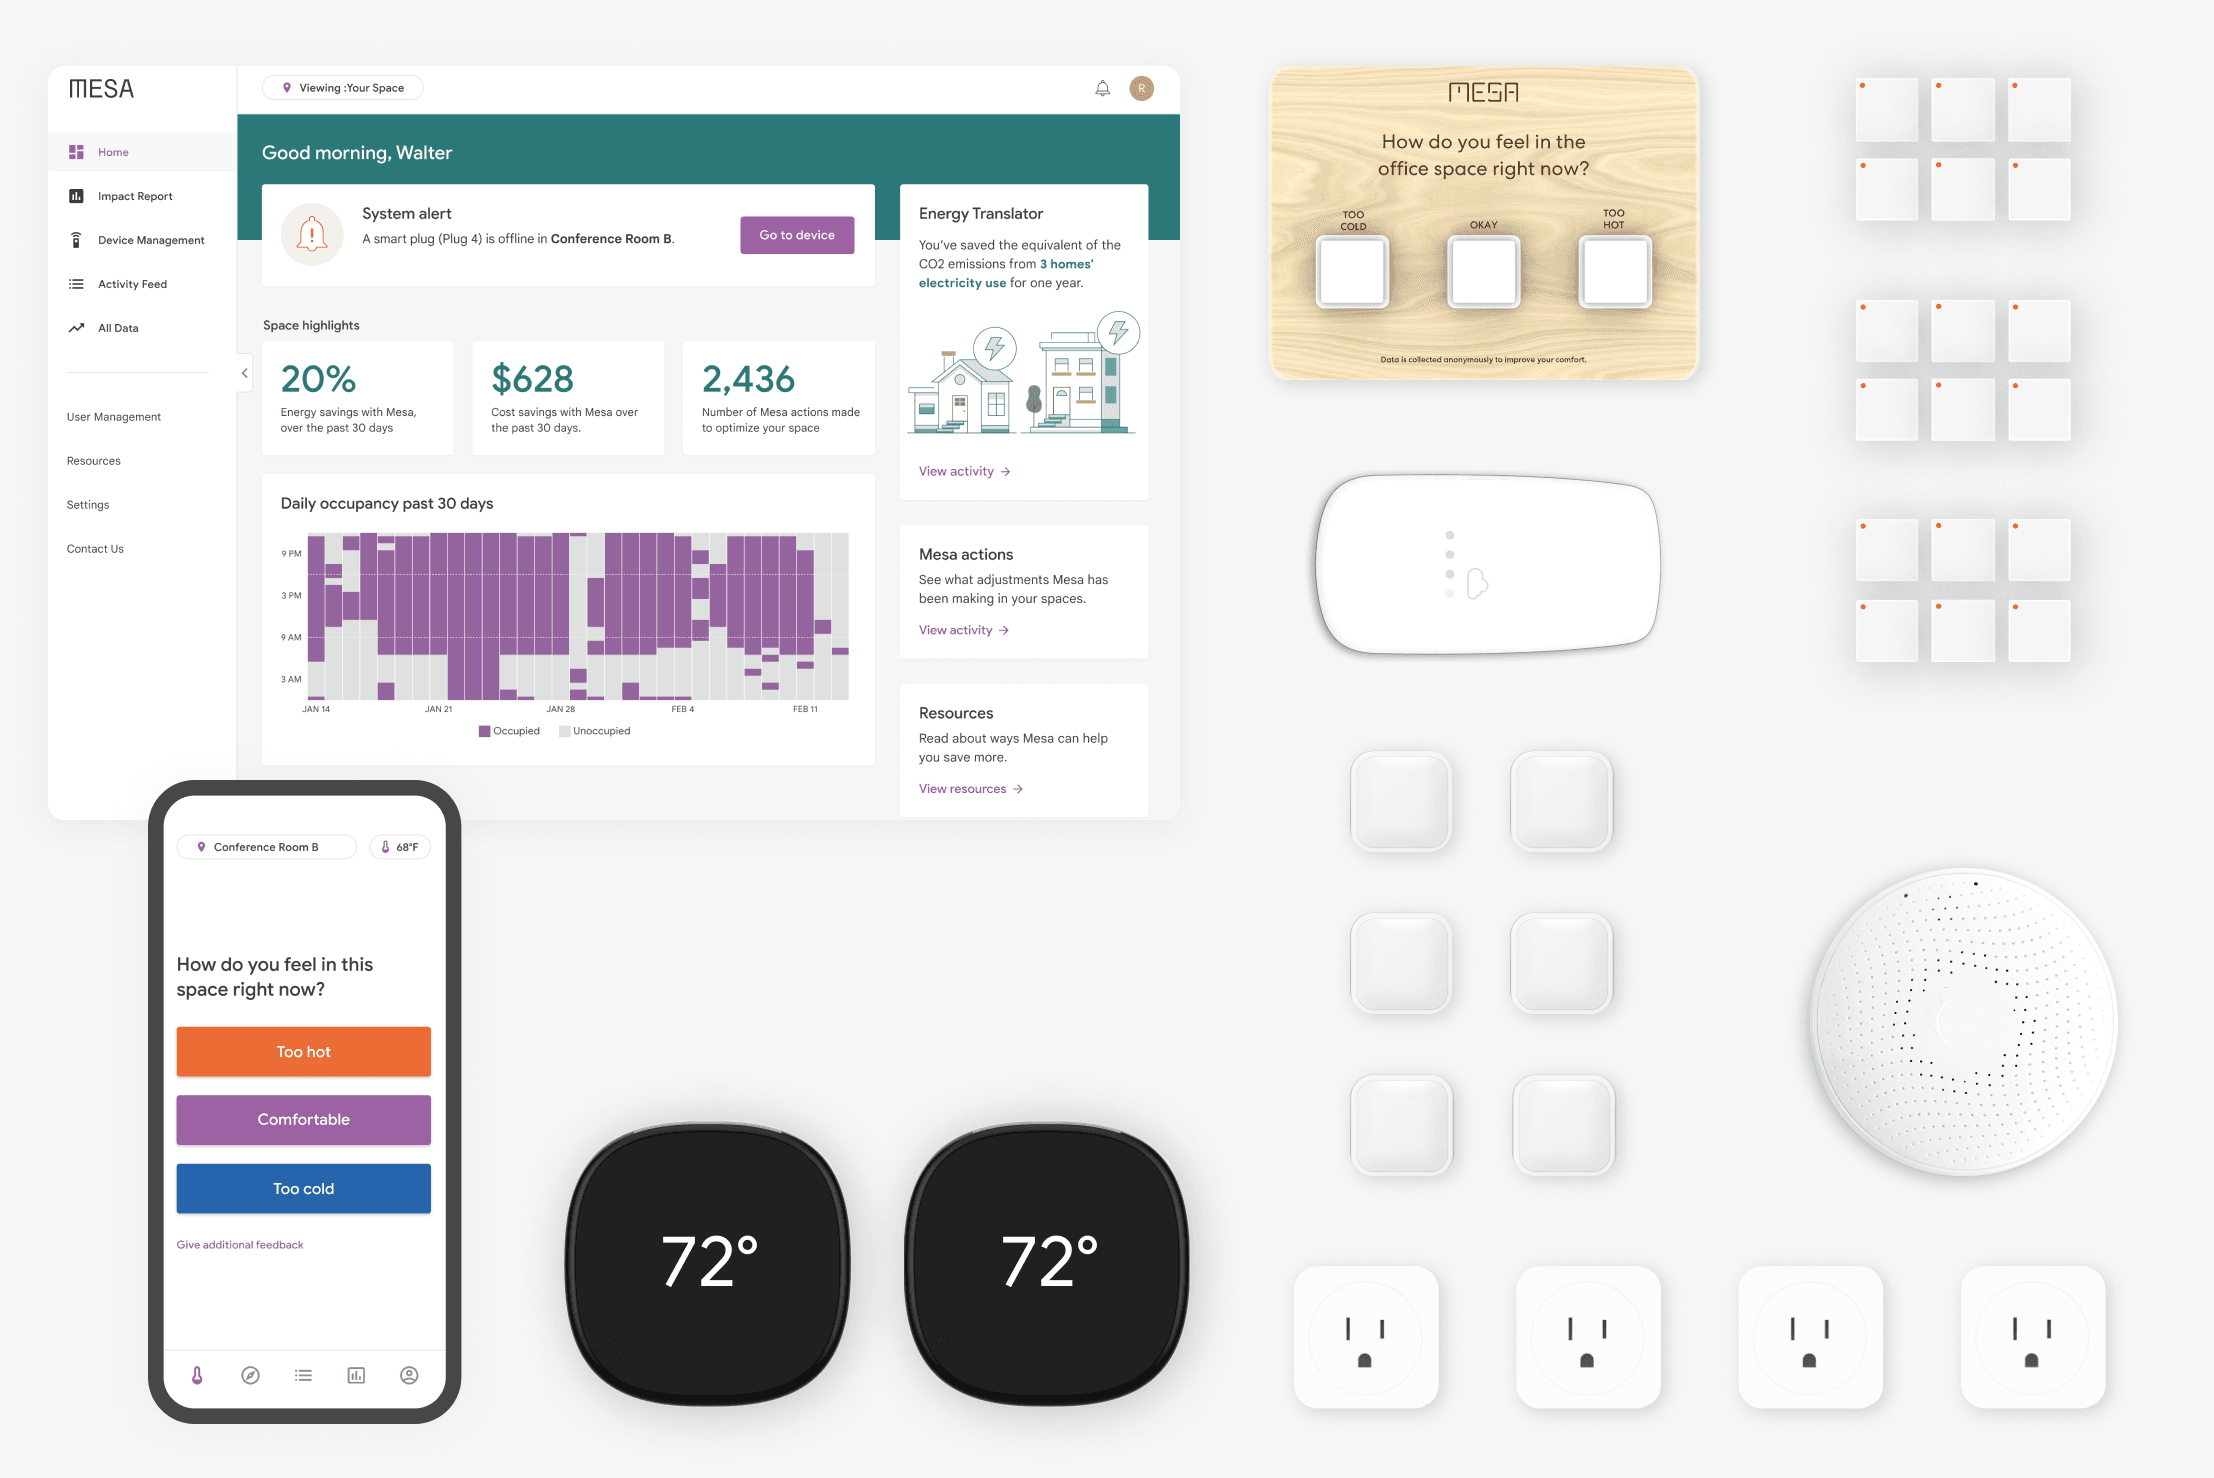 Mesa energy management kit for commercial buildings with thermostats, sensors, plugs, cloud connector,  and comfort buttons.